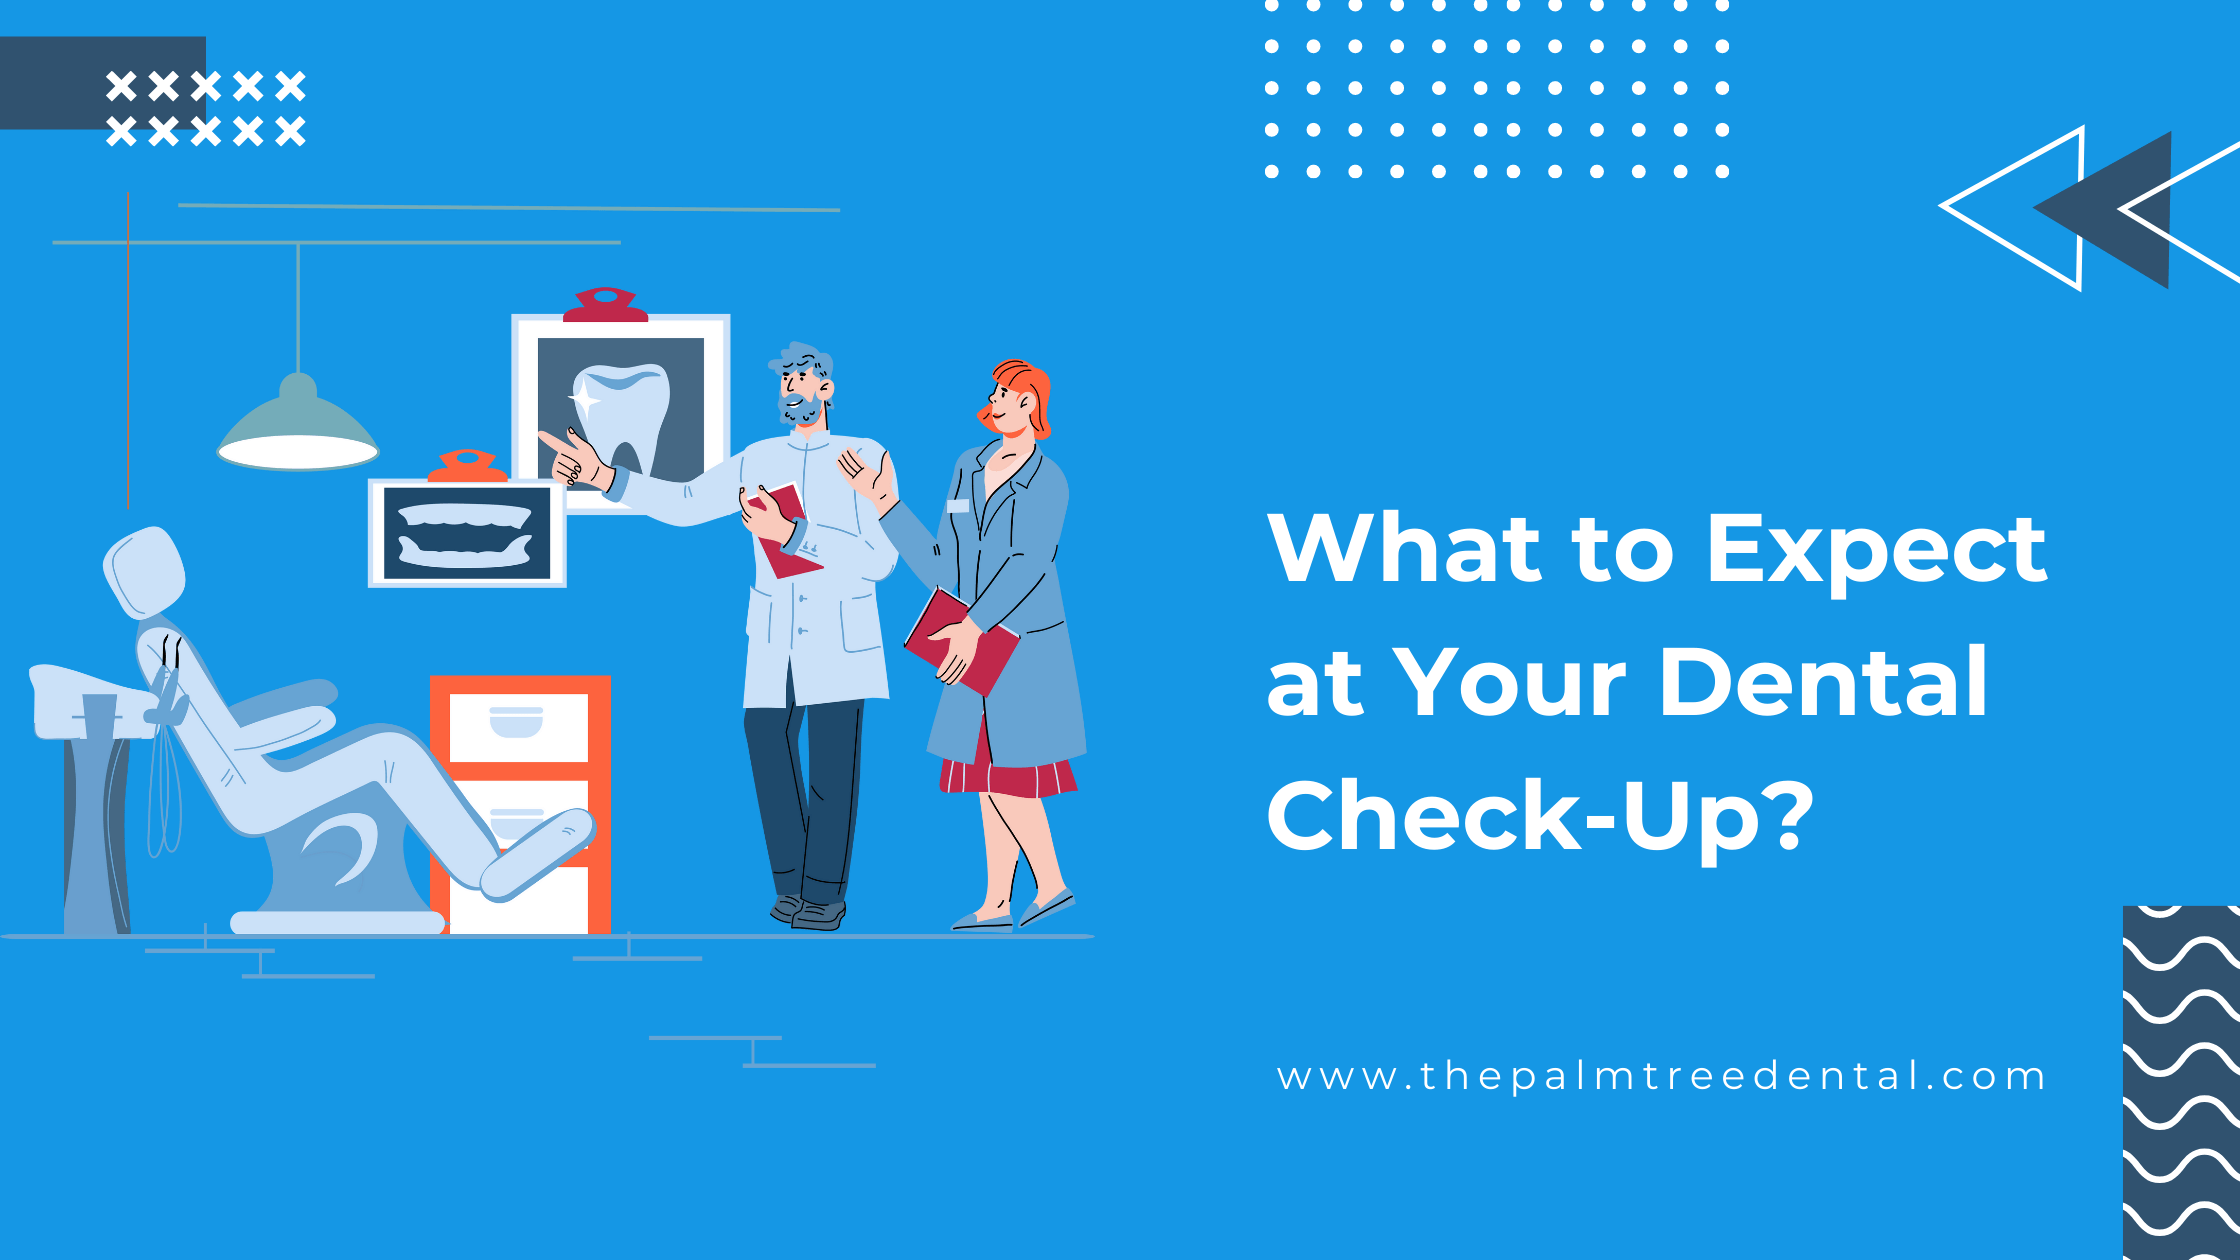 What to Expect at Your Dental Check-Up?